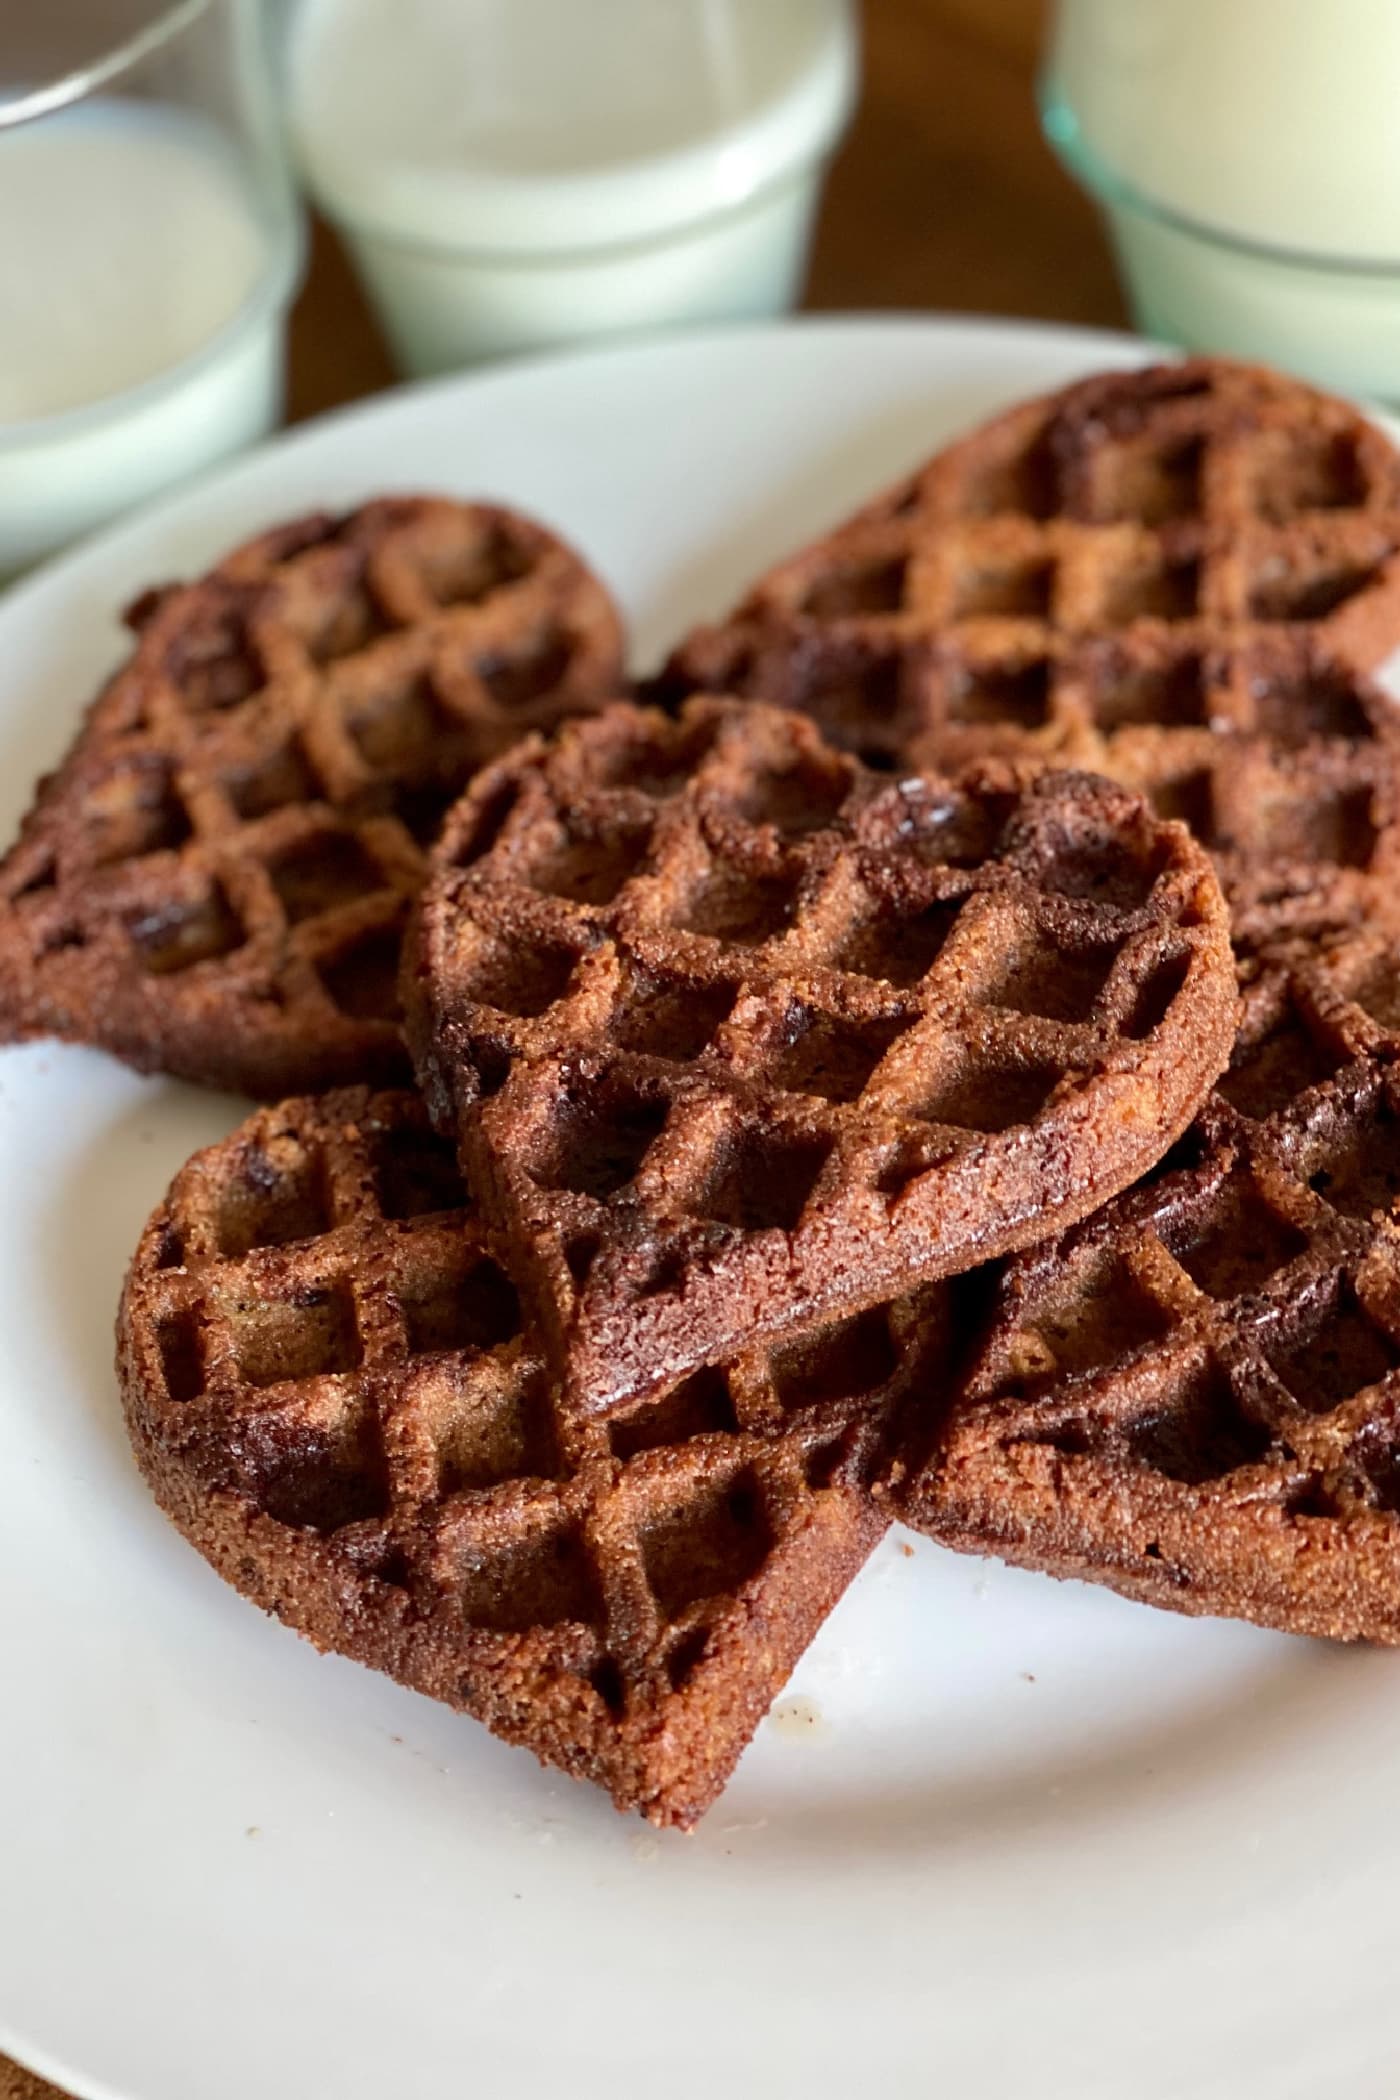 https://reluctantentertainer.com/wp-content/uploads/2022/02/Heart-Shaped-Waffle-Cookie.jpeg